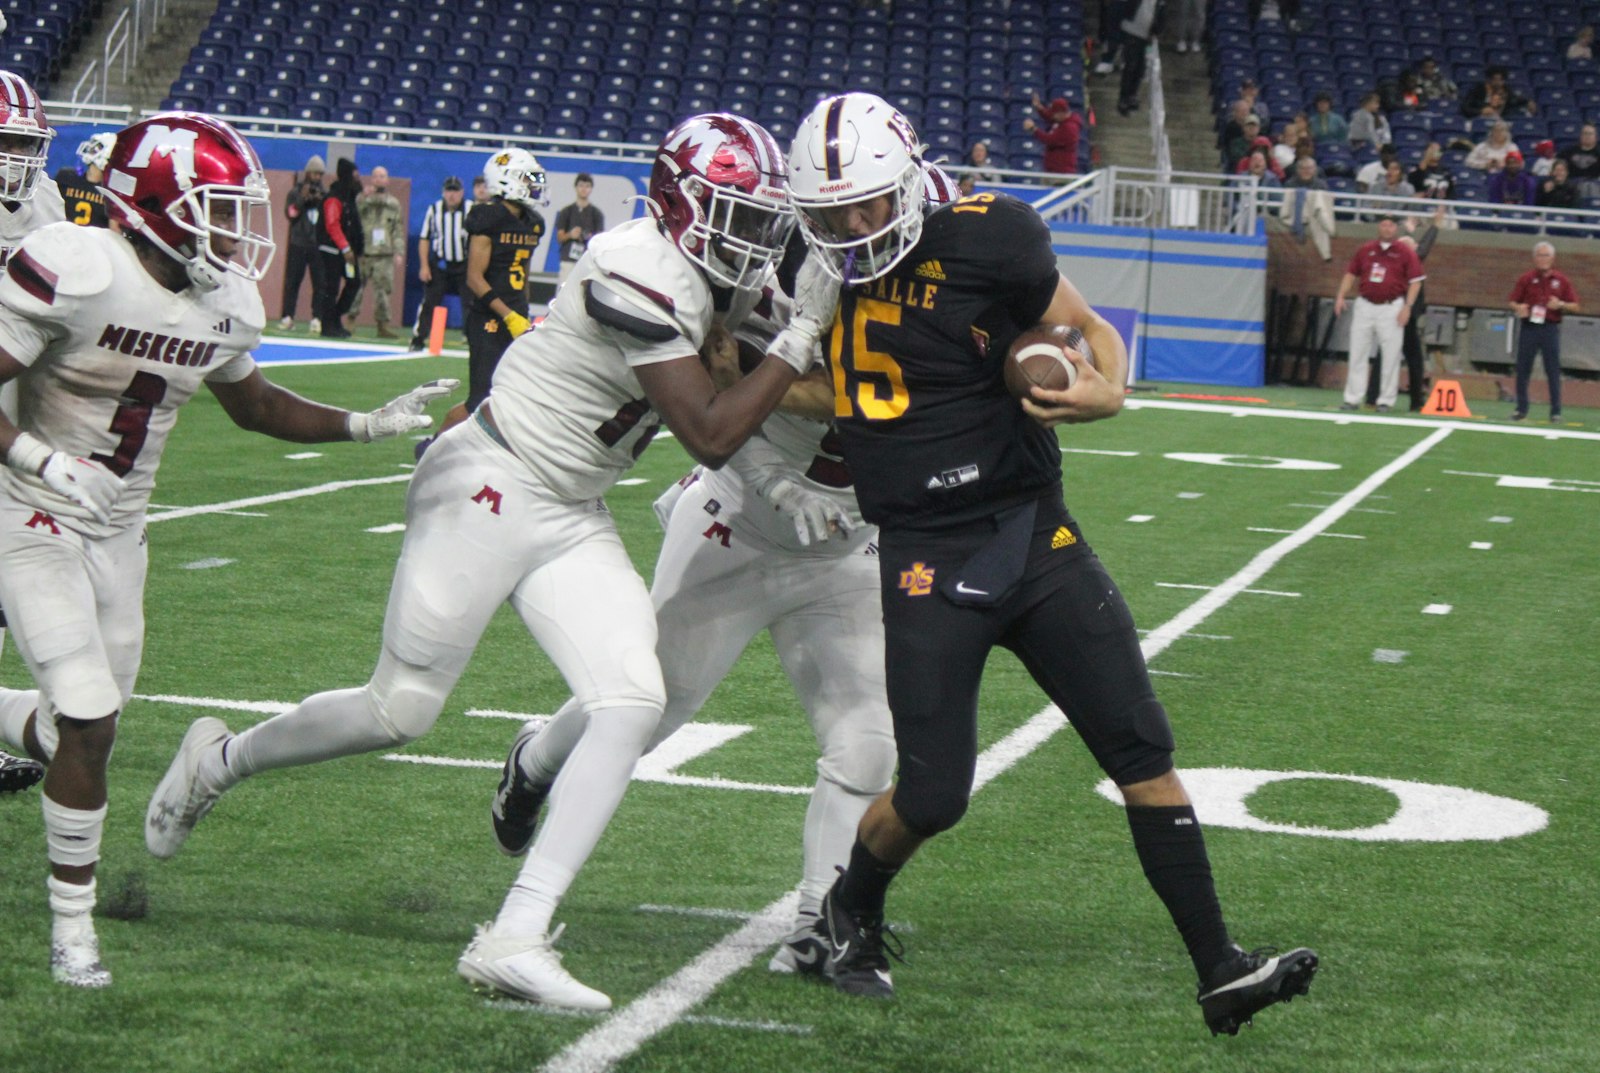 On the final play of the game, De La Salle quarterback Sante Gasperoni is stopped shy of the end zone by Muskegon’s M’Khi Guy, Stanley Cunningham and Chris Jones. (Photo by Wright Wilson | Special to Detroit Catholic)